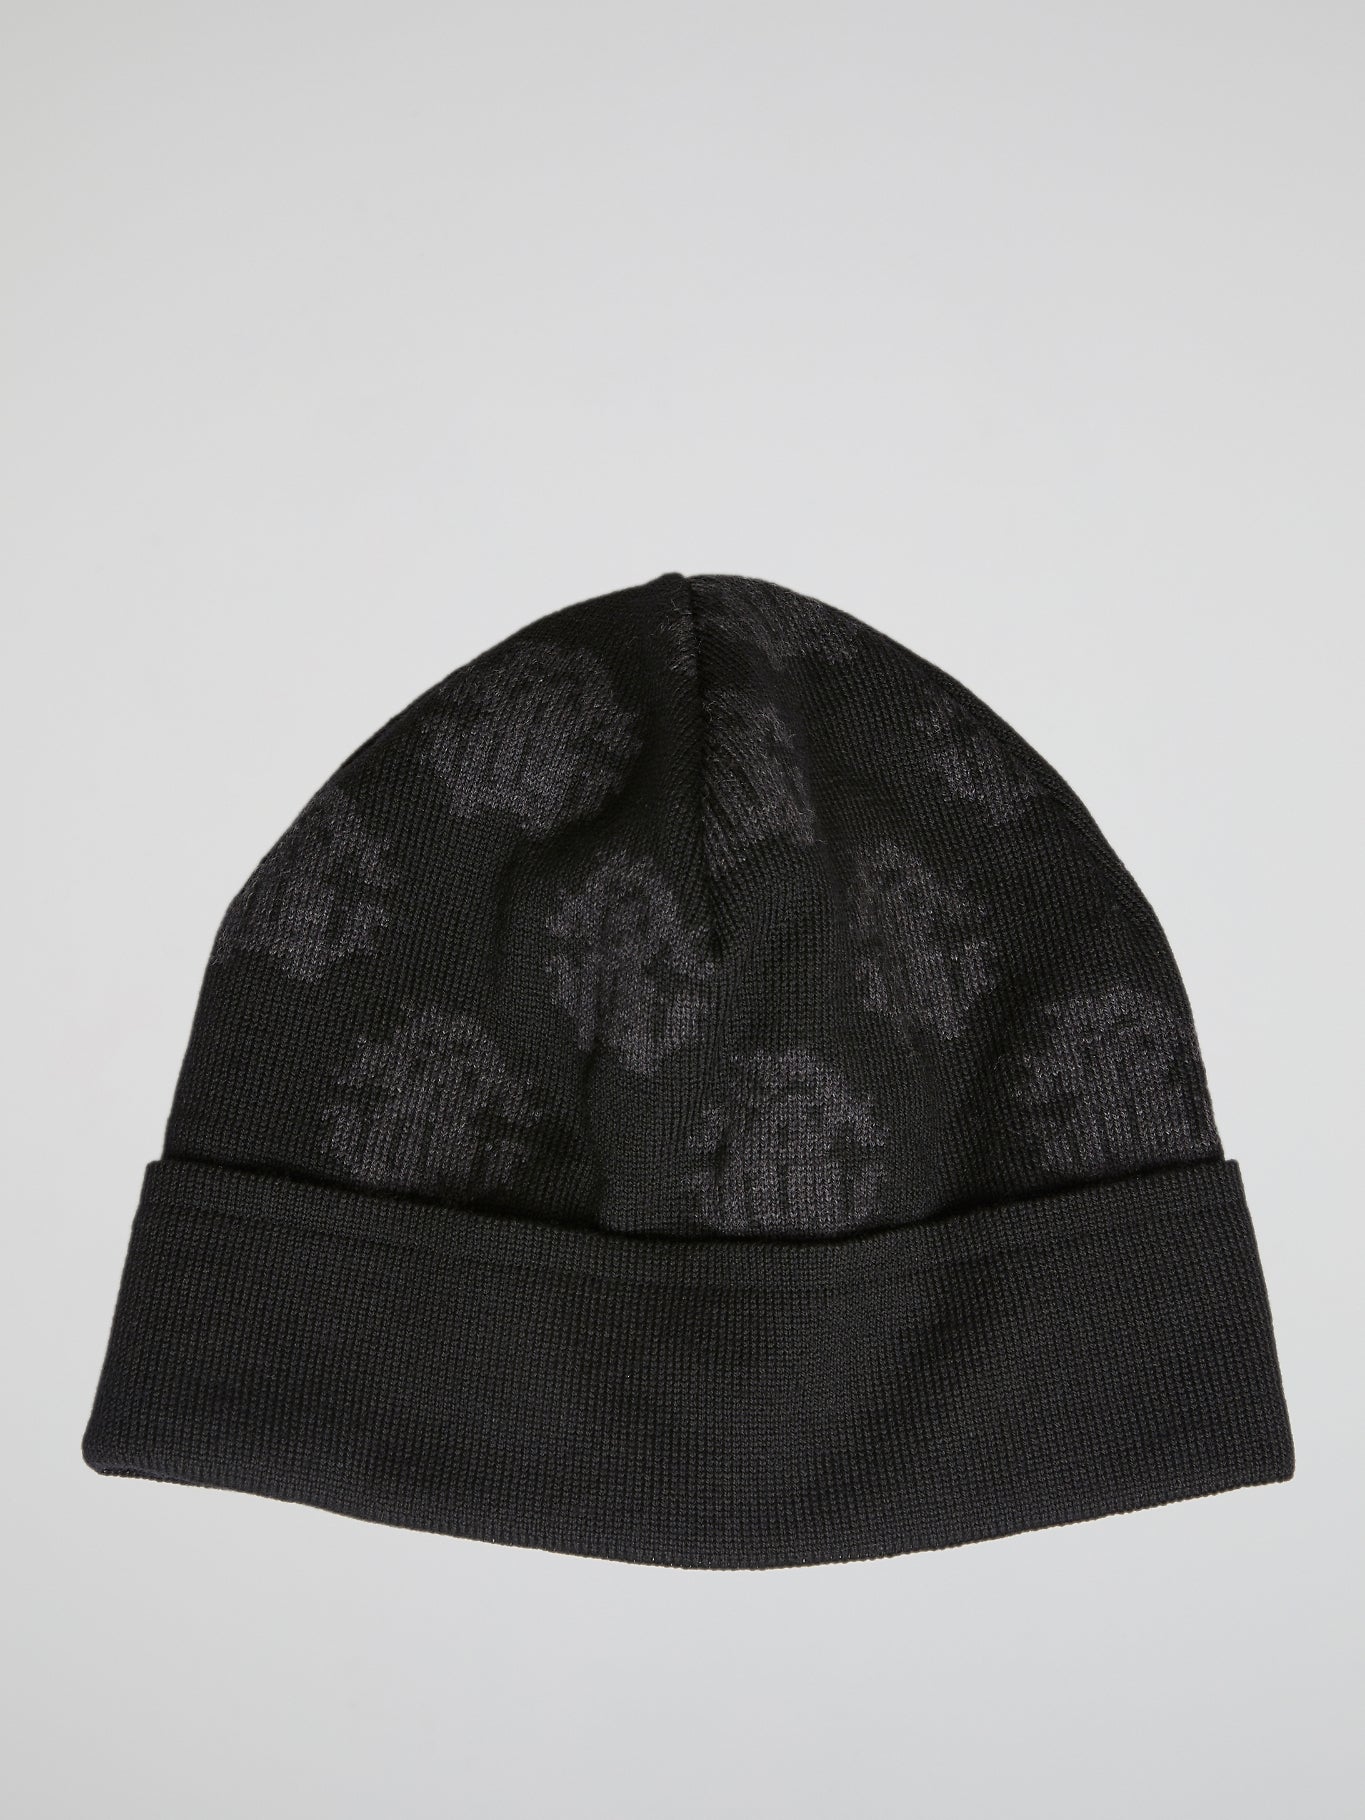 Stay warm and stylish this winter with our Black Logo Beanie by Roberto Cavalli, the perfect accessory to elevate any outfit. Made with premium quality materials and featuring the iconic Roberto Cavalli logo, this beanie is a must-have for fashion-forward individuals. Grab yours now and turn heads wherever you go!